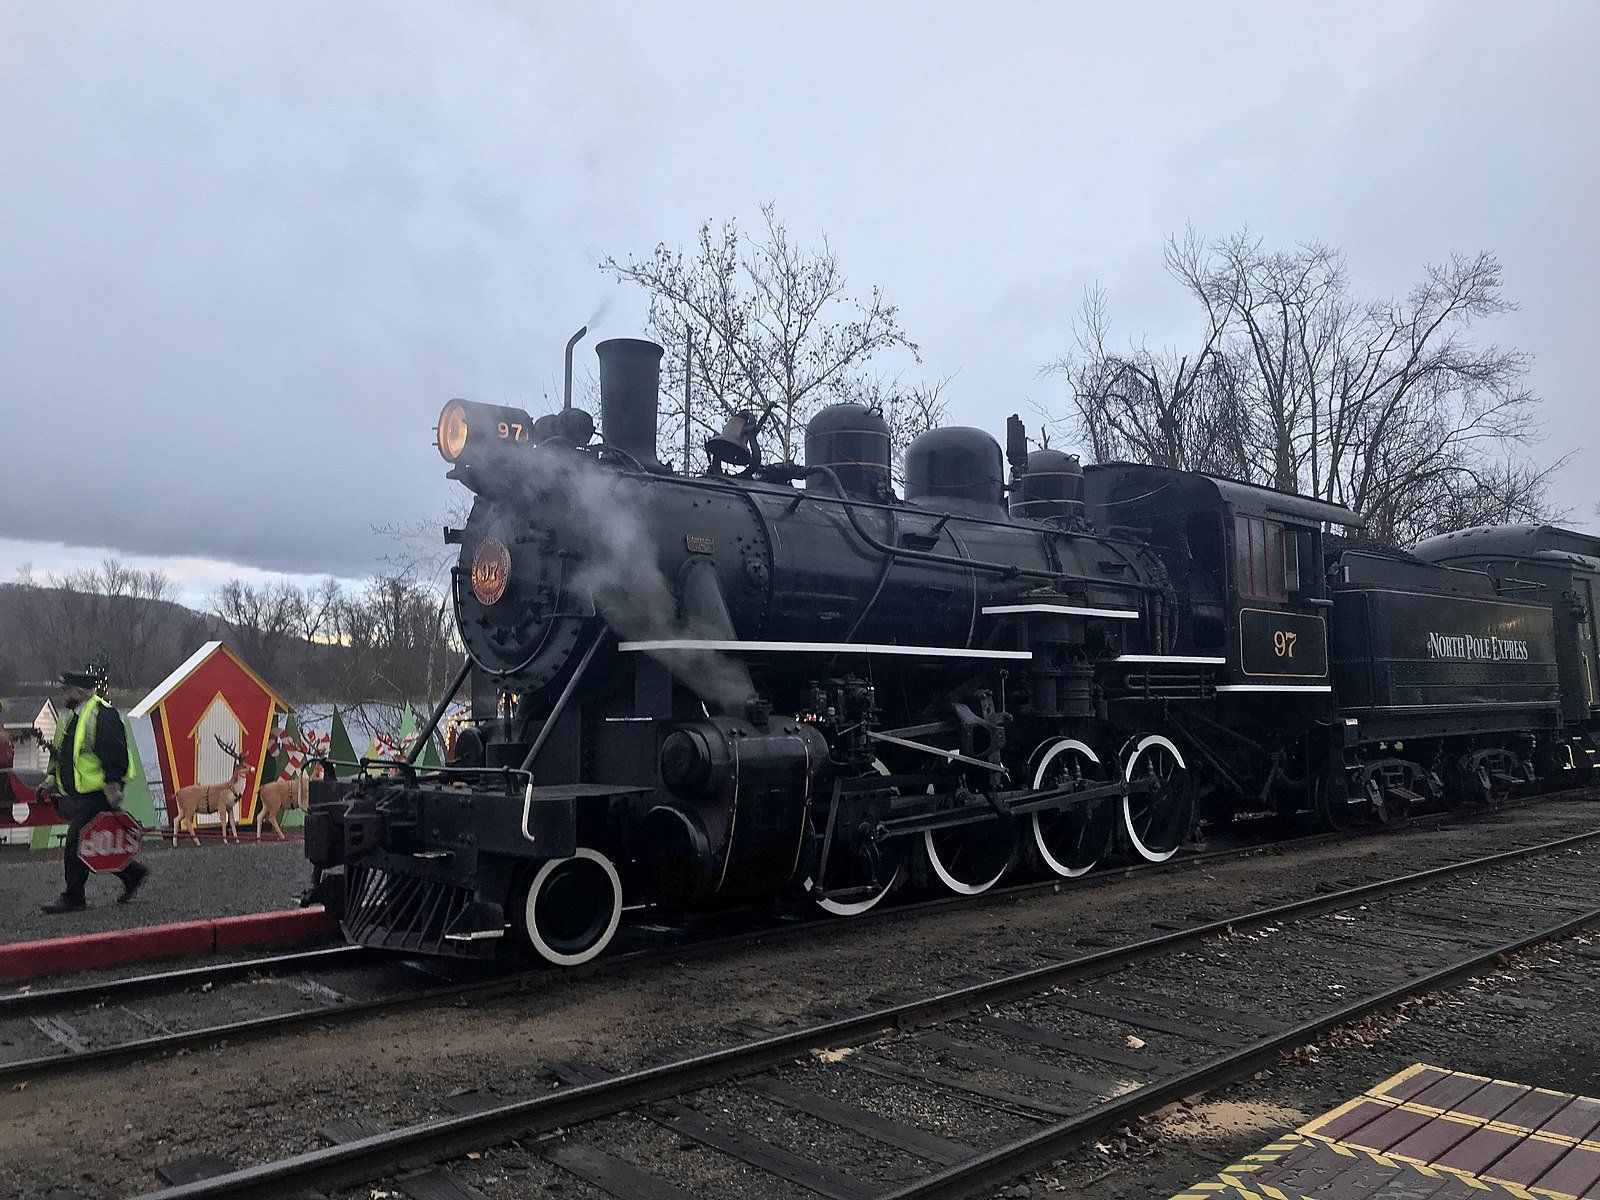 North Pole Express steam engine pulling into the station in Deep River, Connecticut